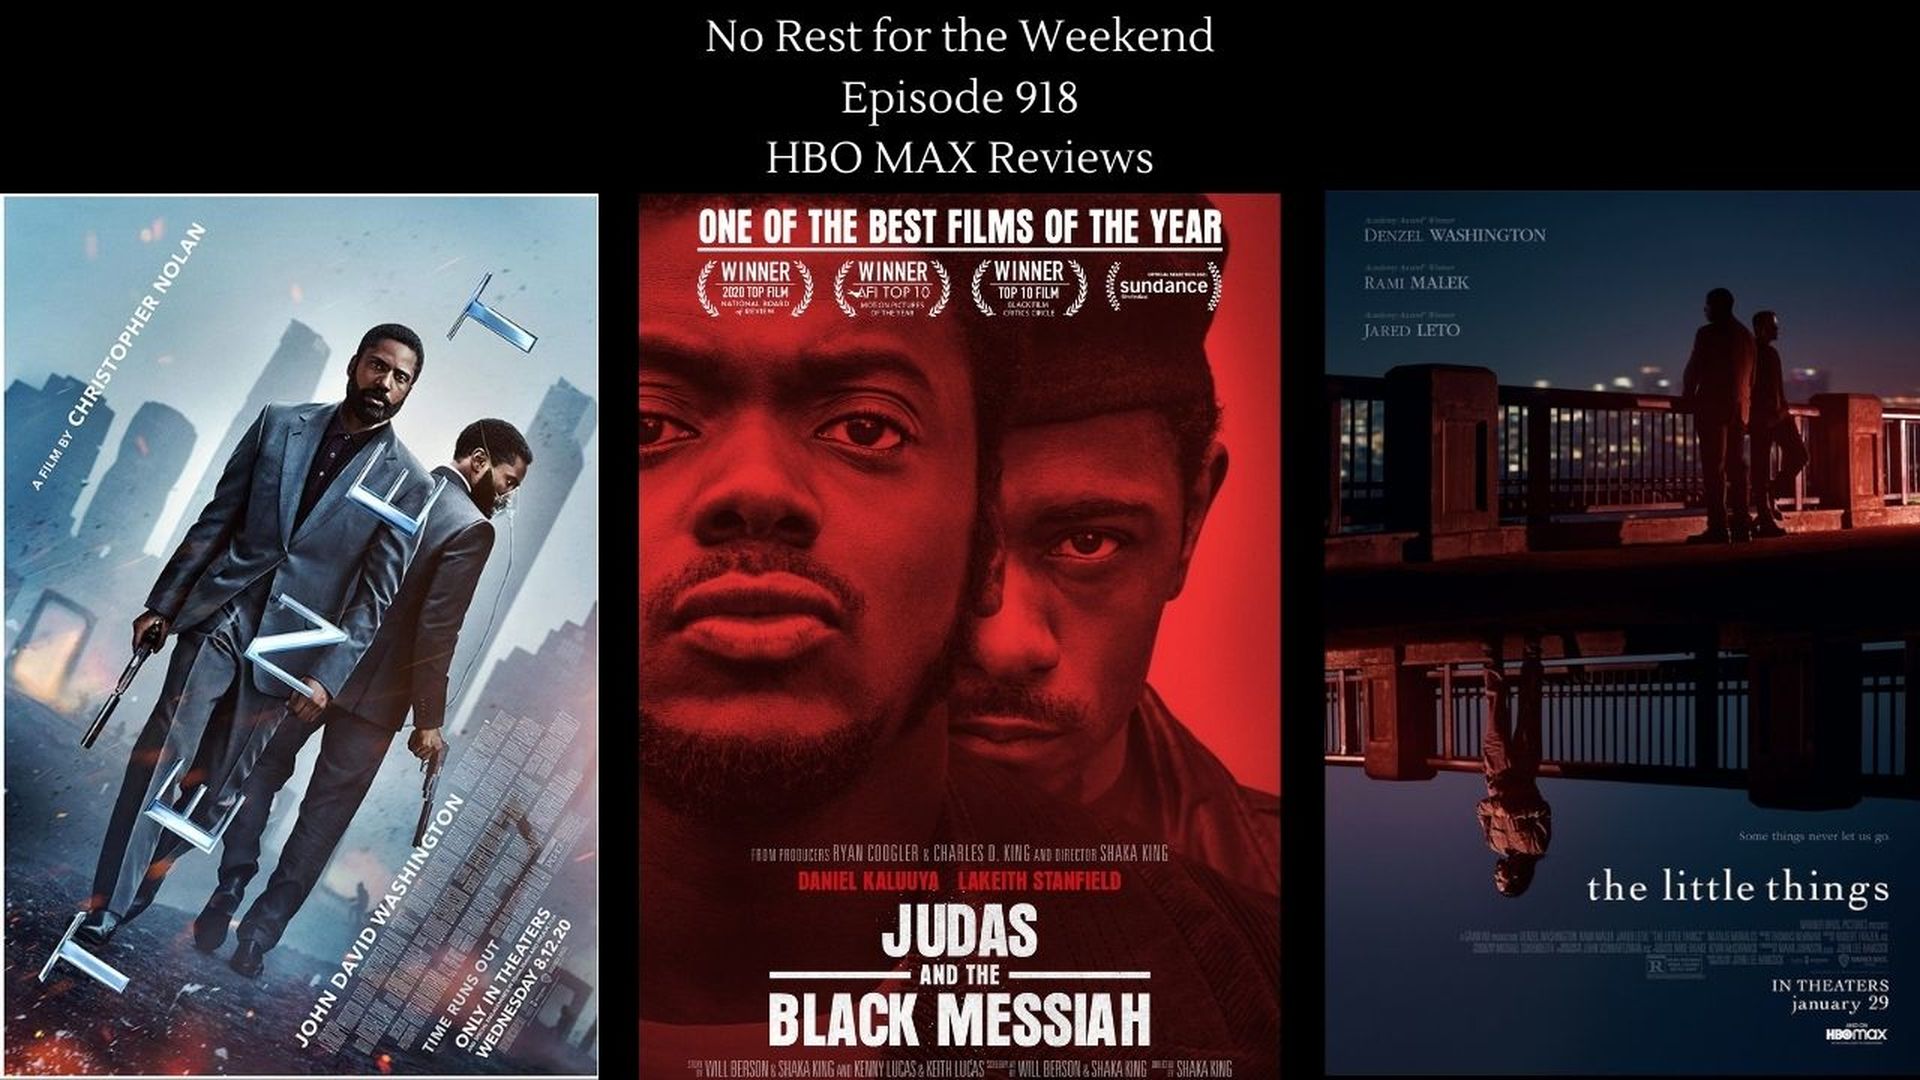 Episode 918: Movie Reviews: Judas and the Black Messiah, the little things, Tenet